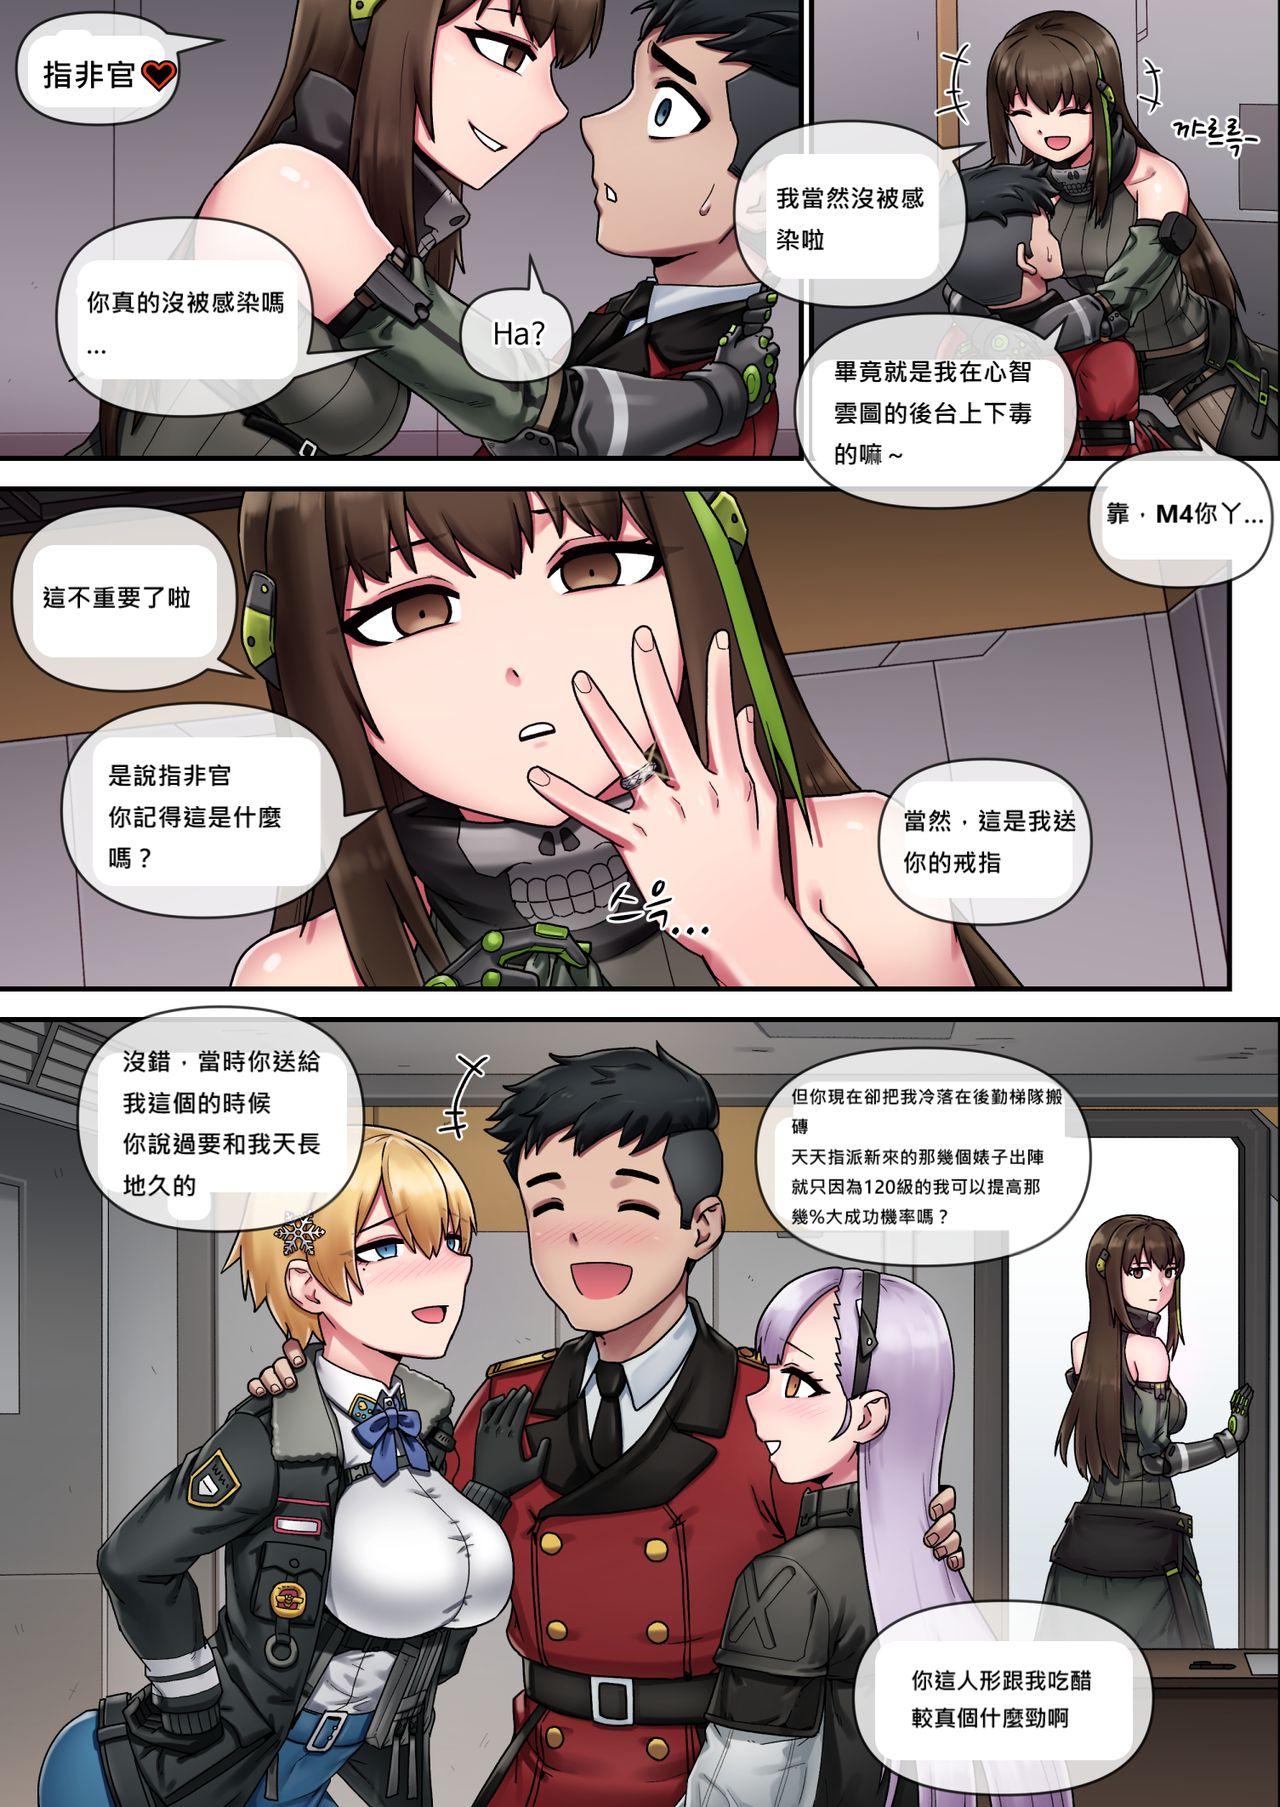 Prostitute My Only Princess - Girls frontline Short - Page 8